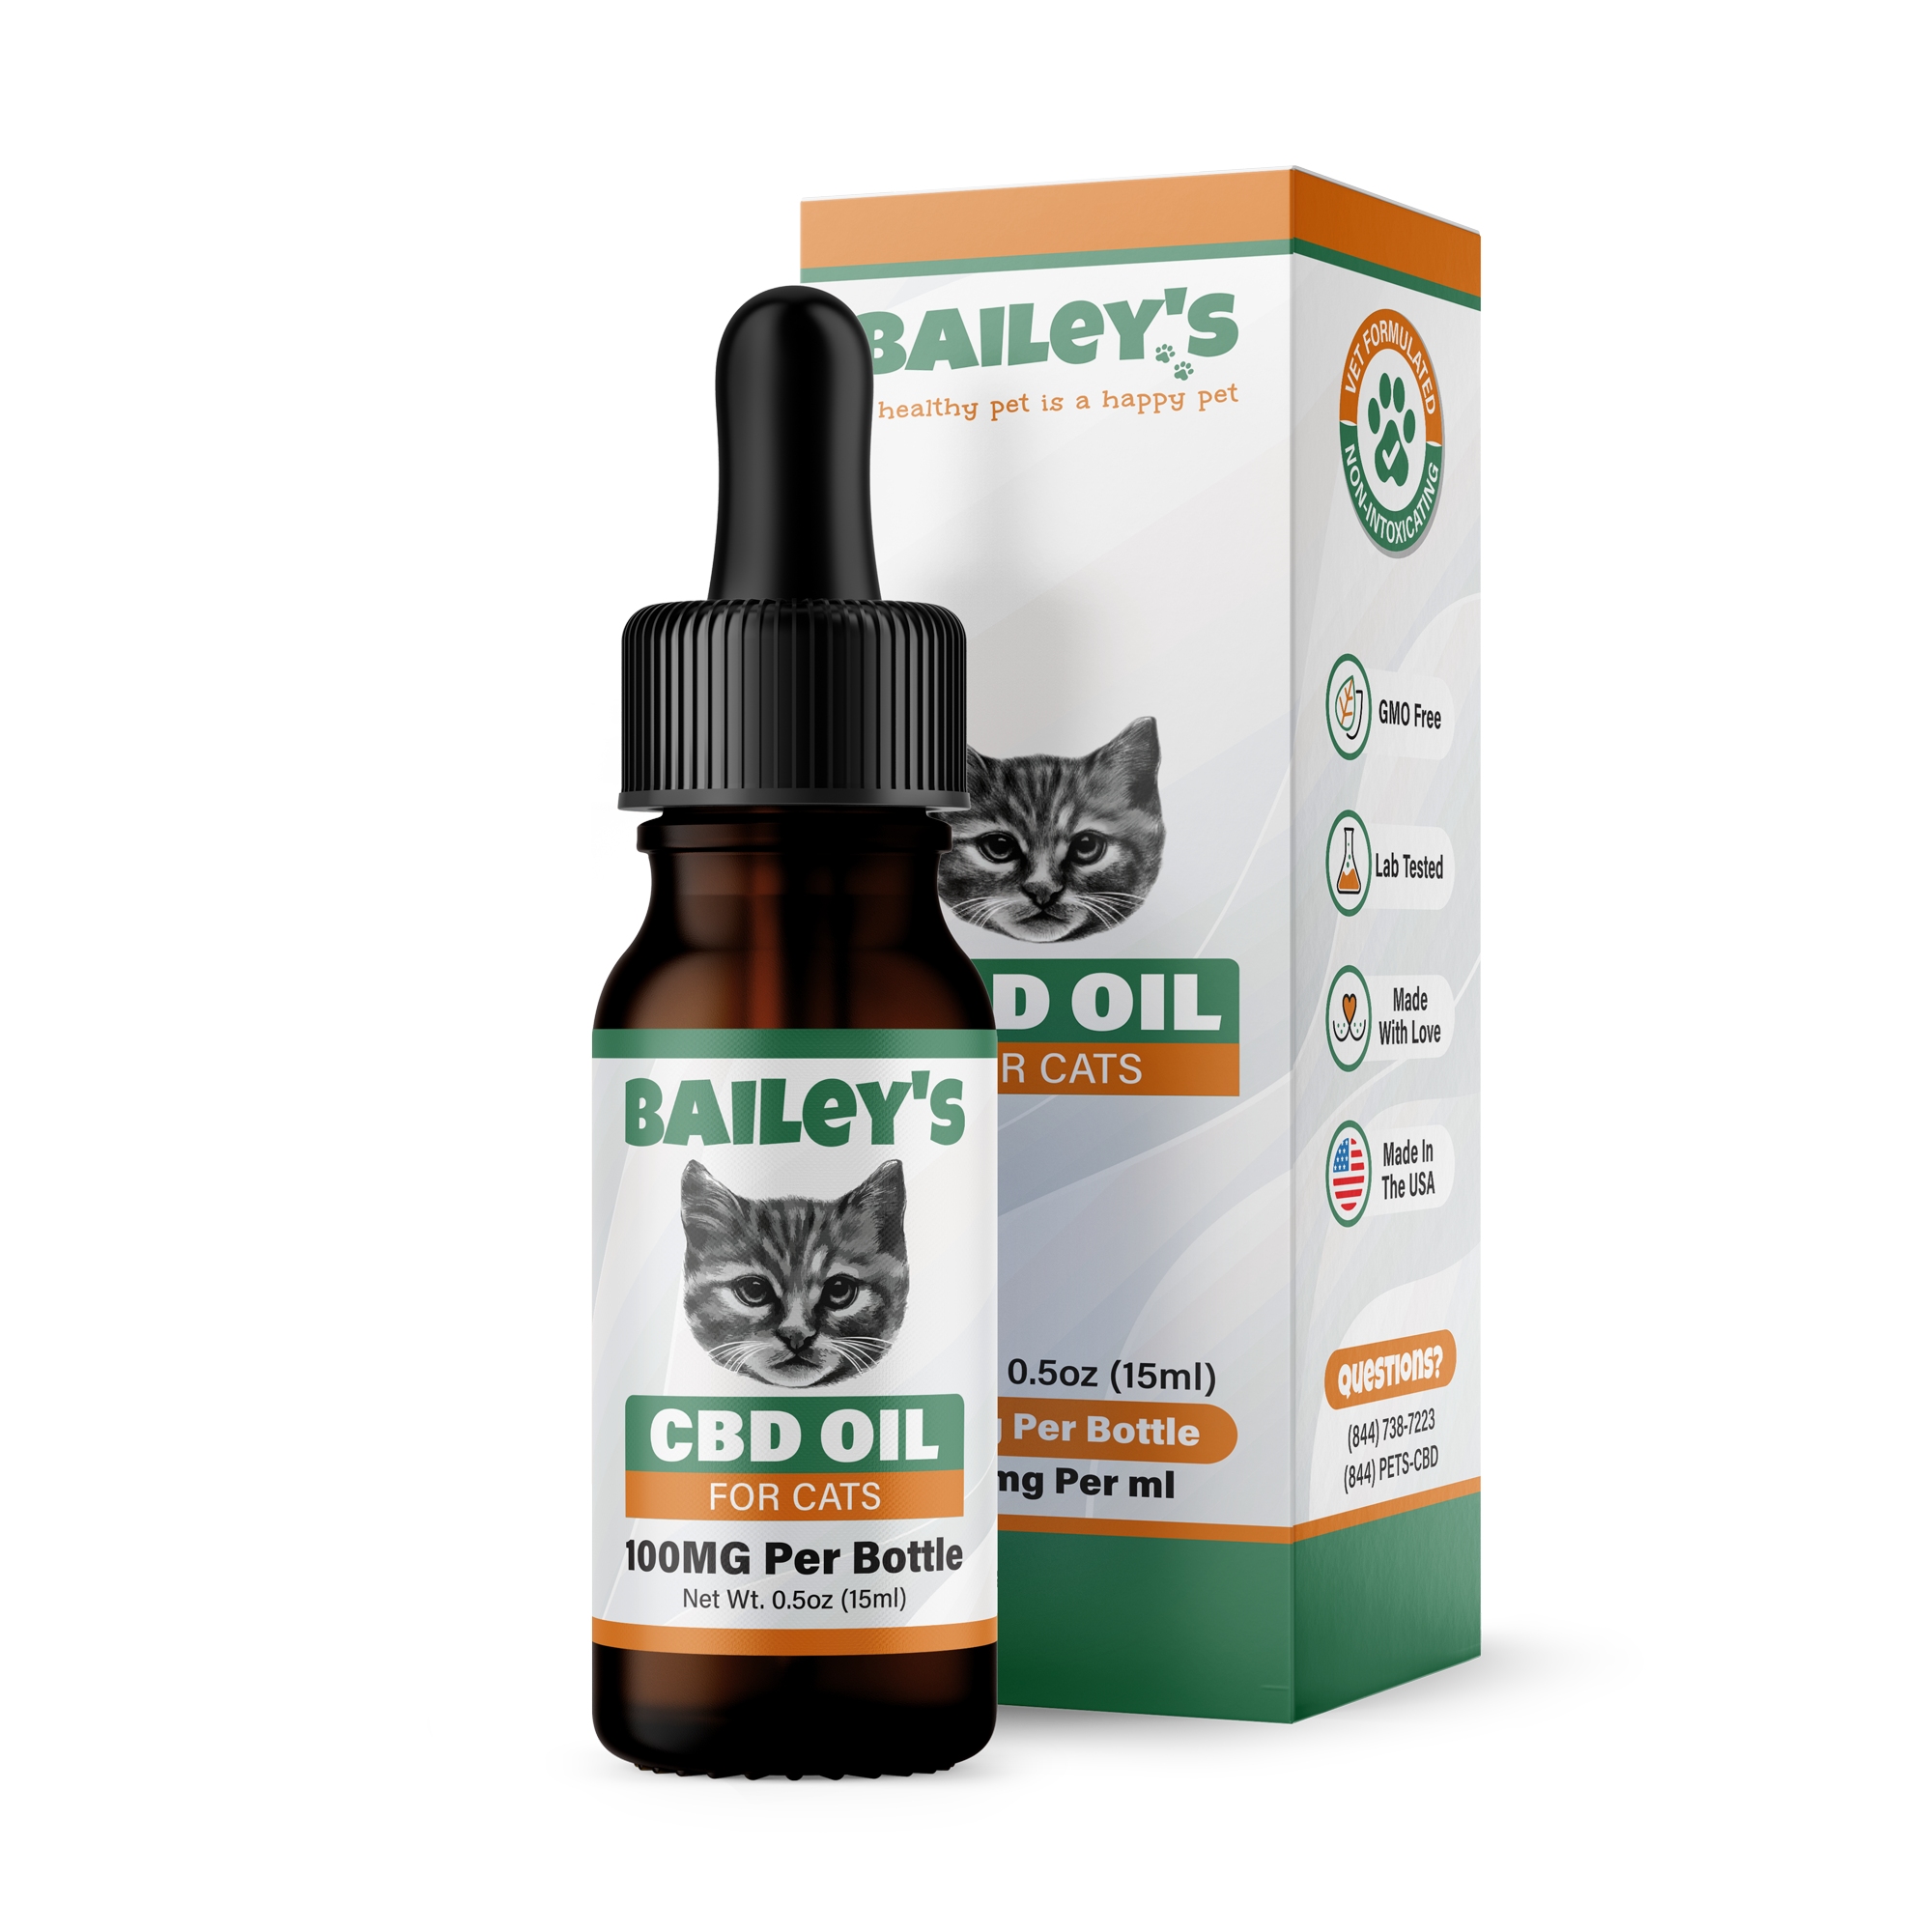 Bailey's Veterinarian Crafted CBD Oil for Cats